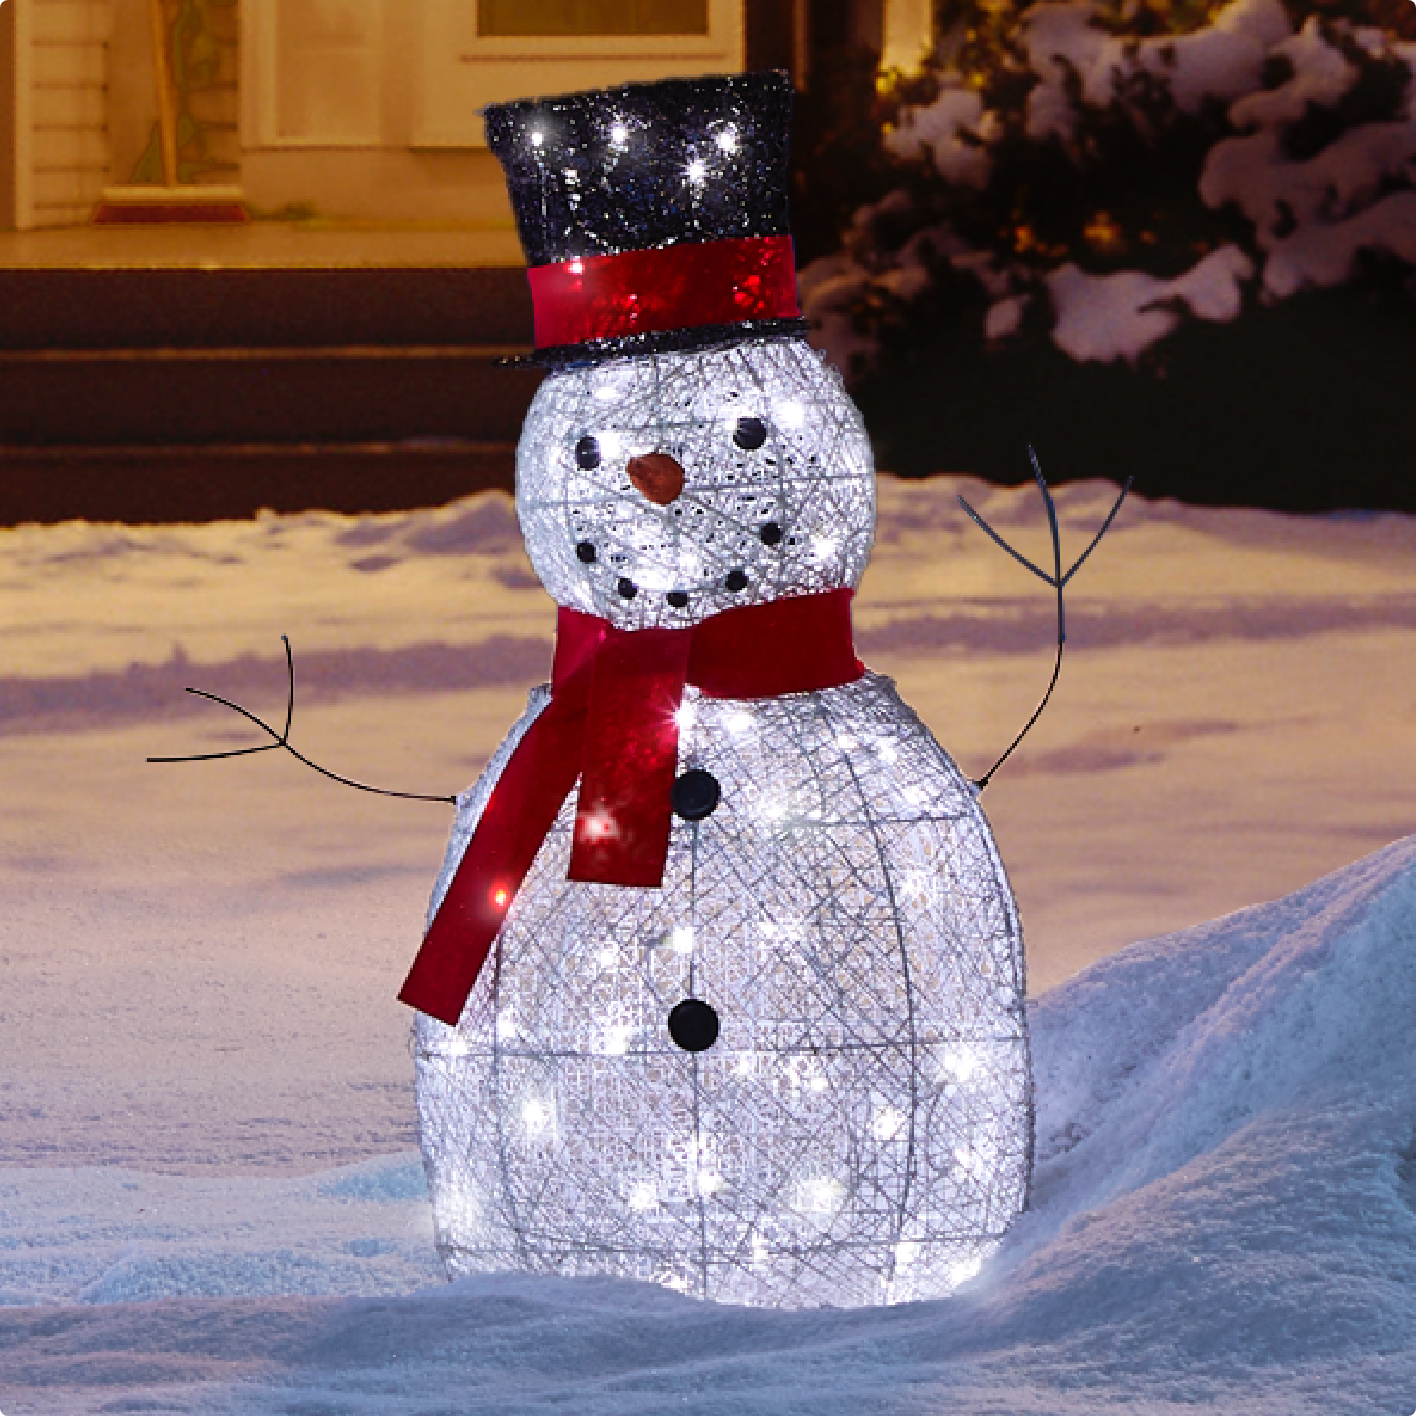 CANVAS LED 3-ft Arctic White Snowman with black top hat on a snowy front lawn.